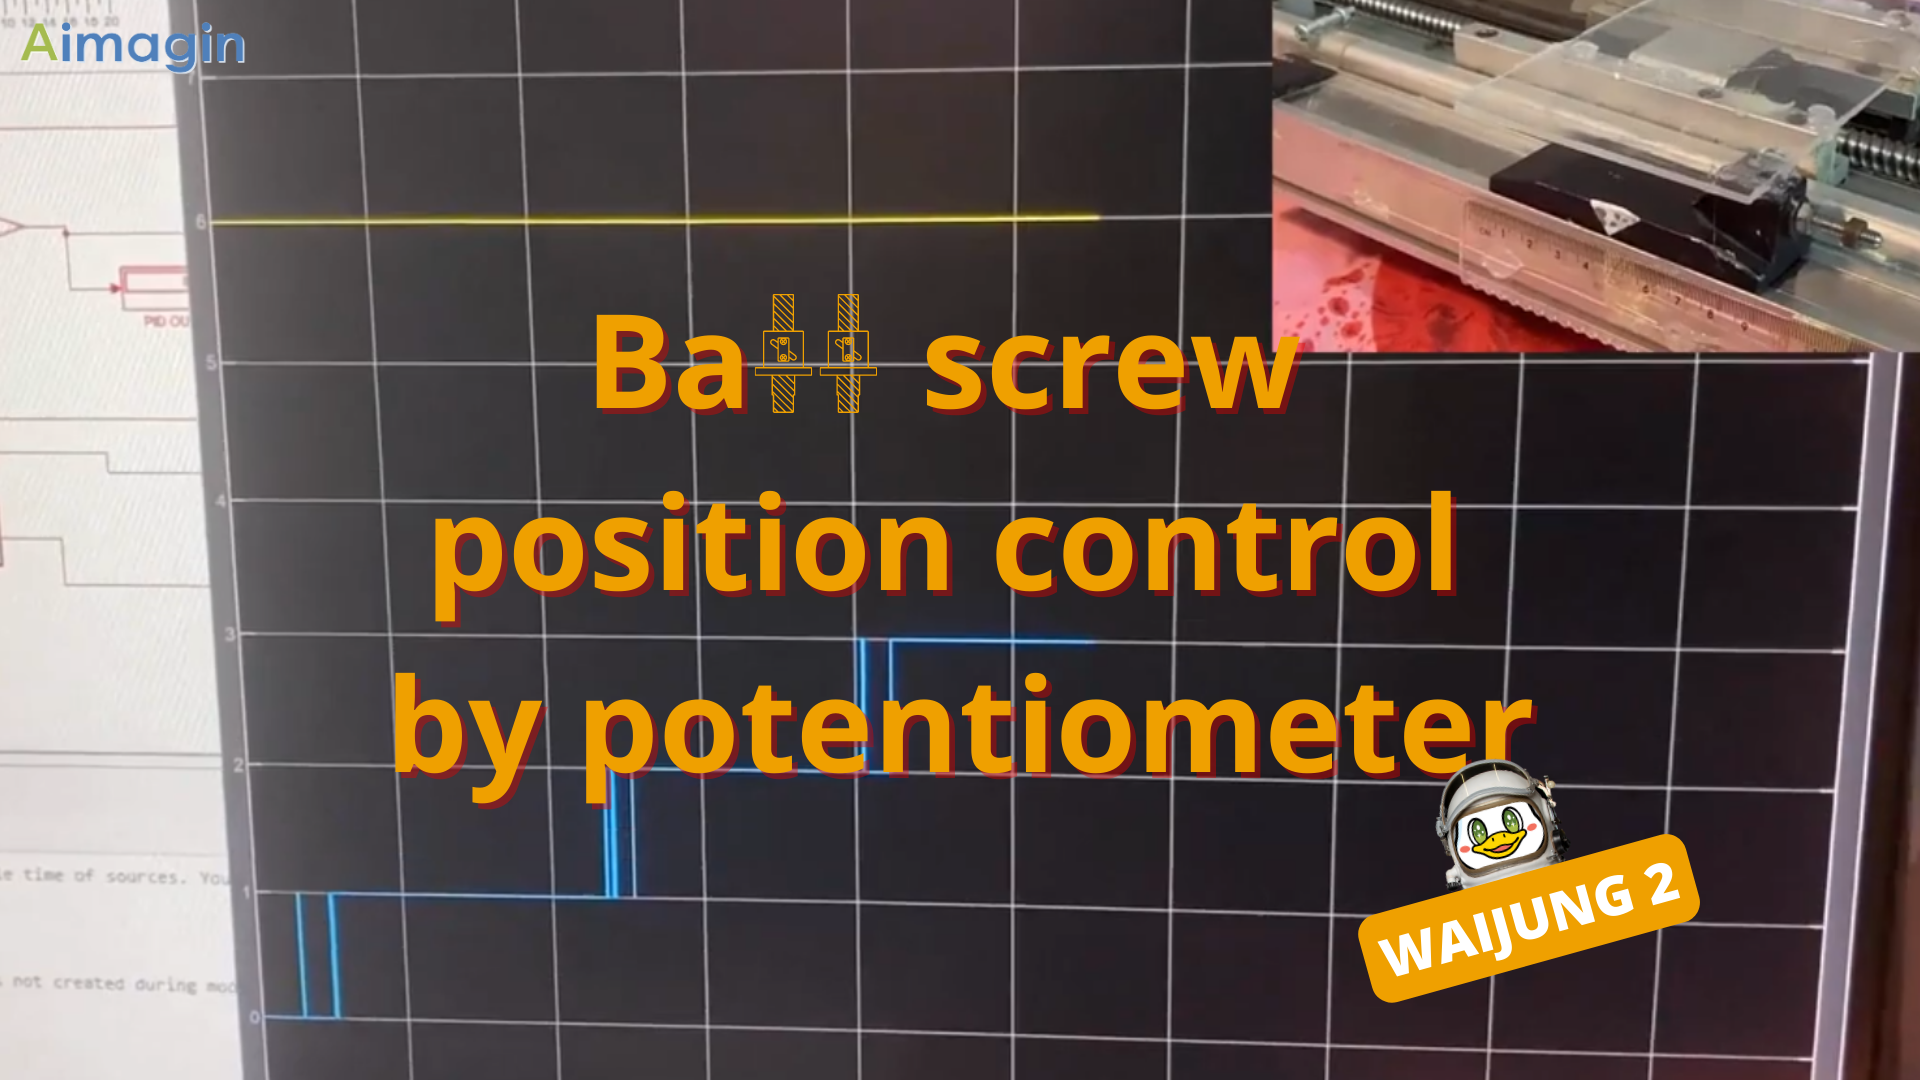 Ball screw position control by potentiometer using MATLAB/Simulink and Waijung 2 for ESP32